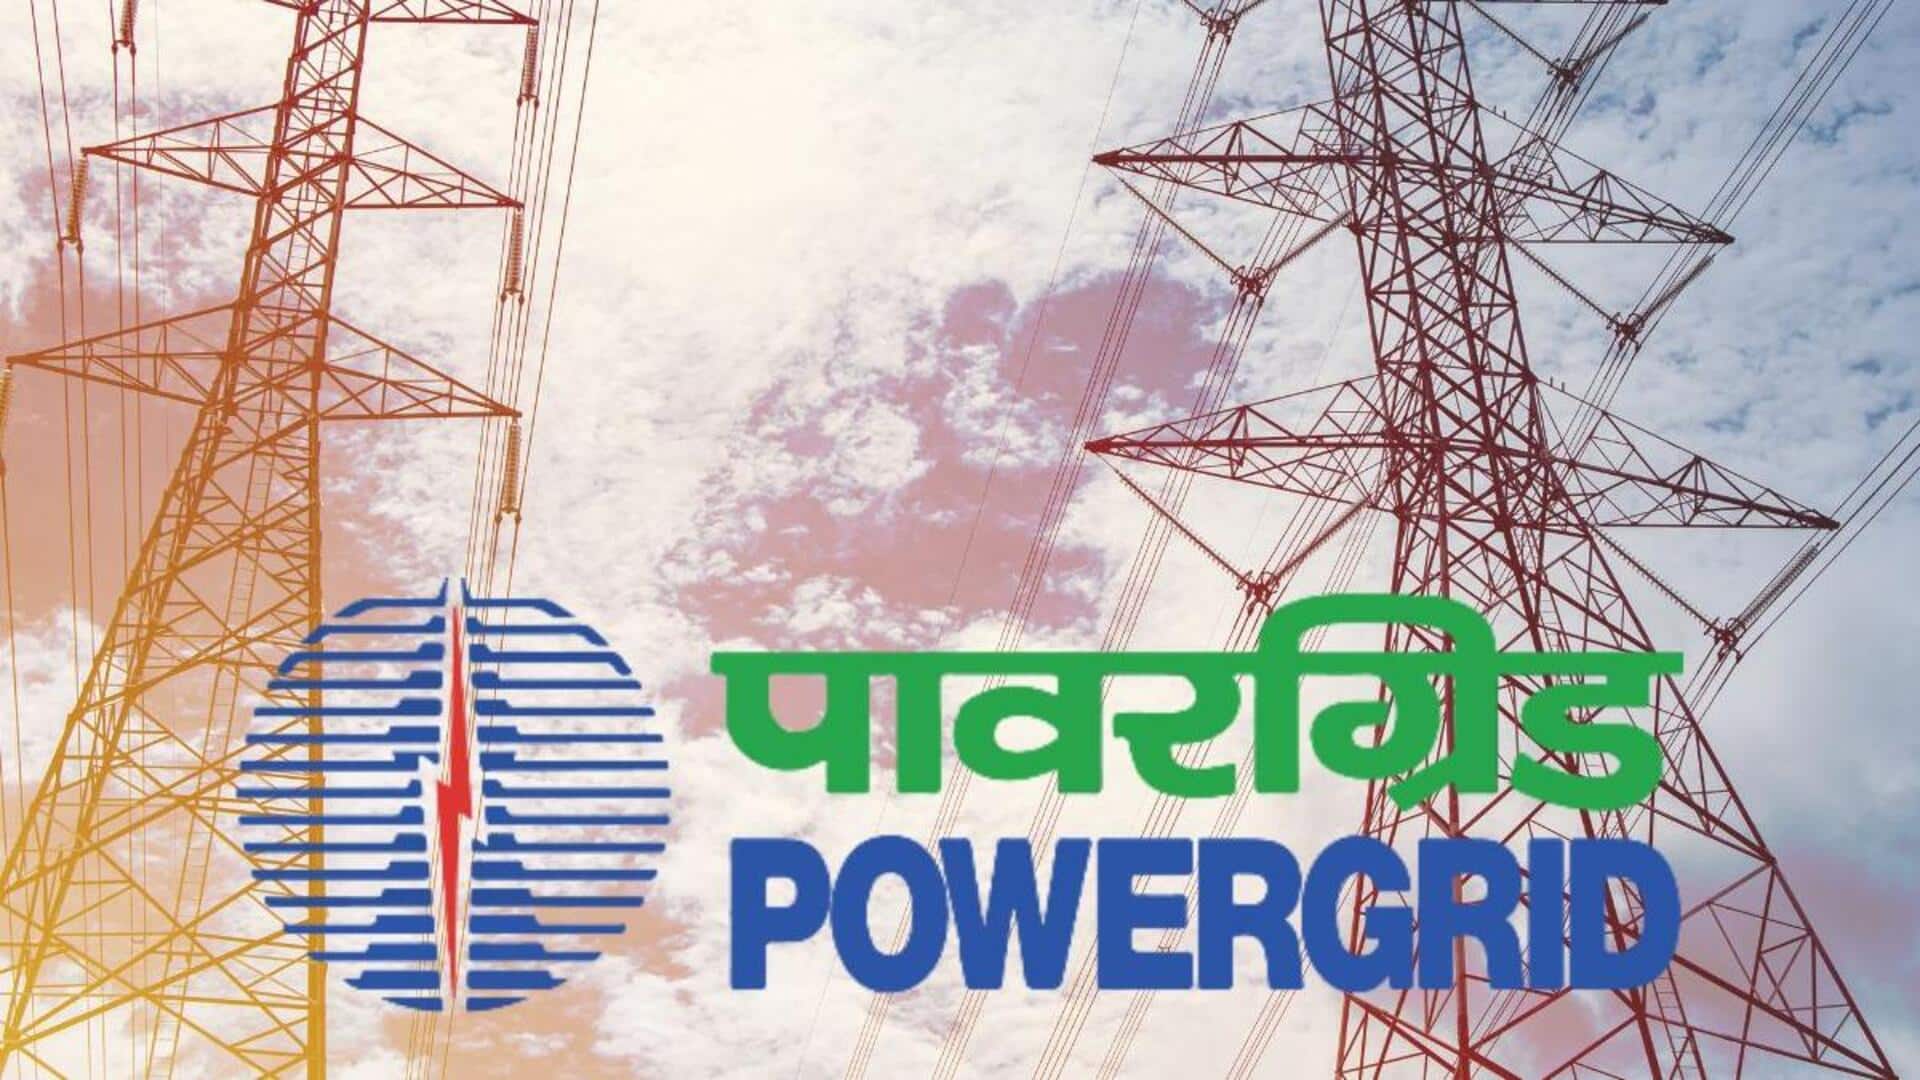 Power Grid Q3 net profit increases 10.5% to Rs. 4,028cr